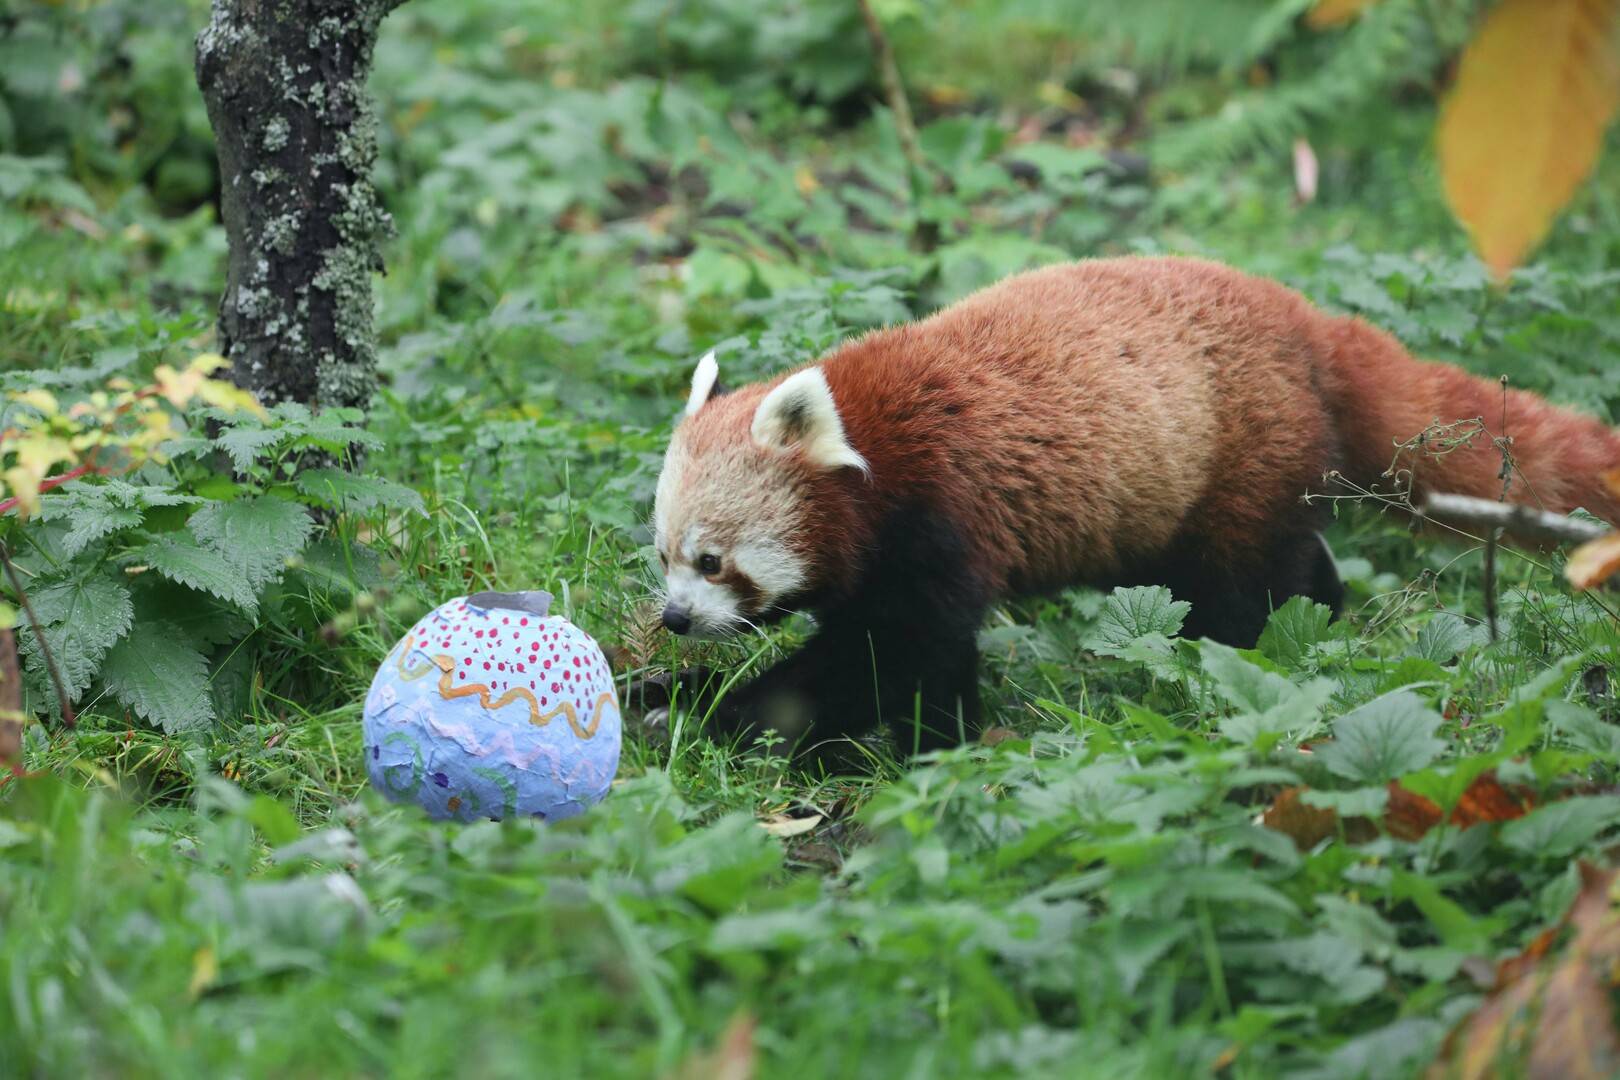 Red panda playing with Easter egg at Edinburgh Zoo,© The Royal Zoological Society of Scotland